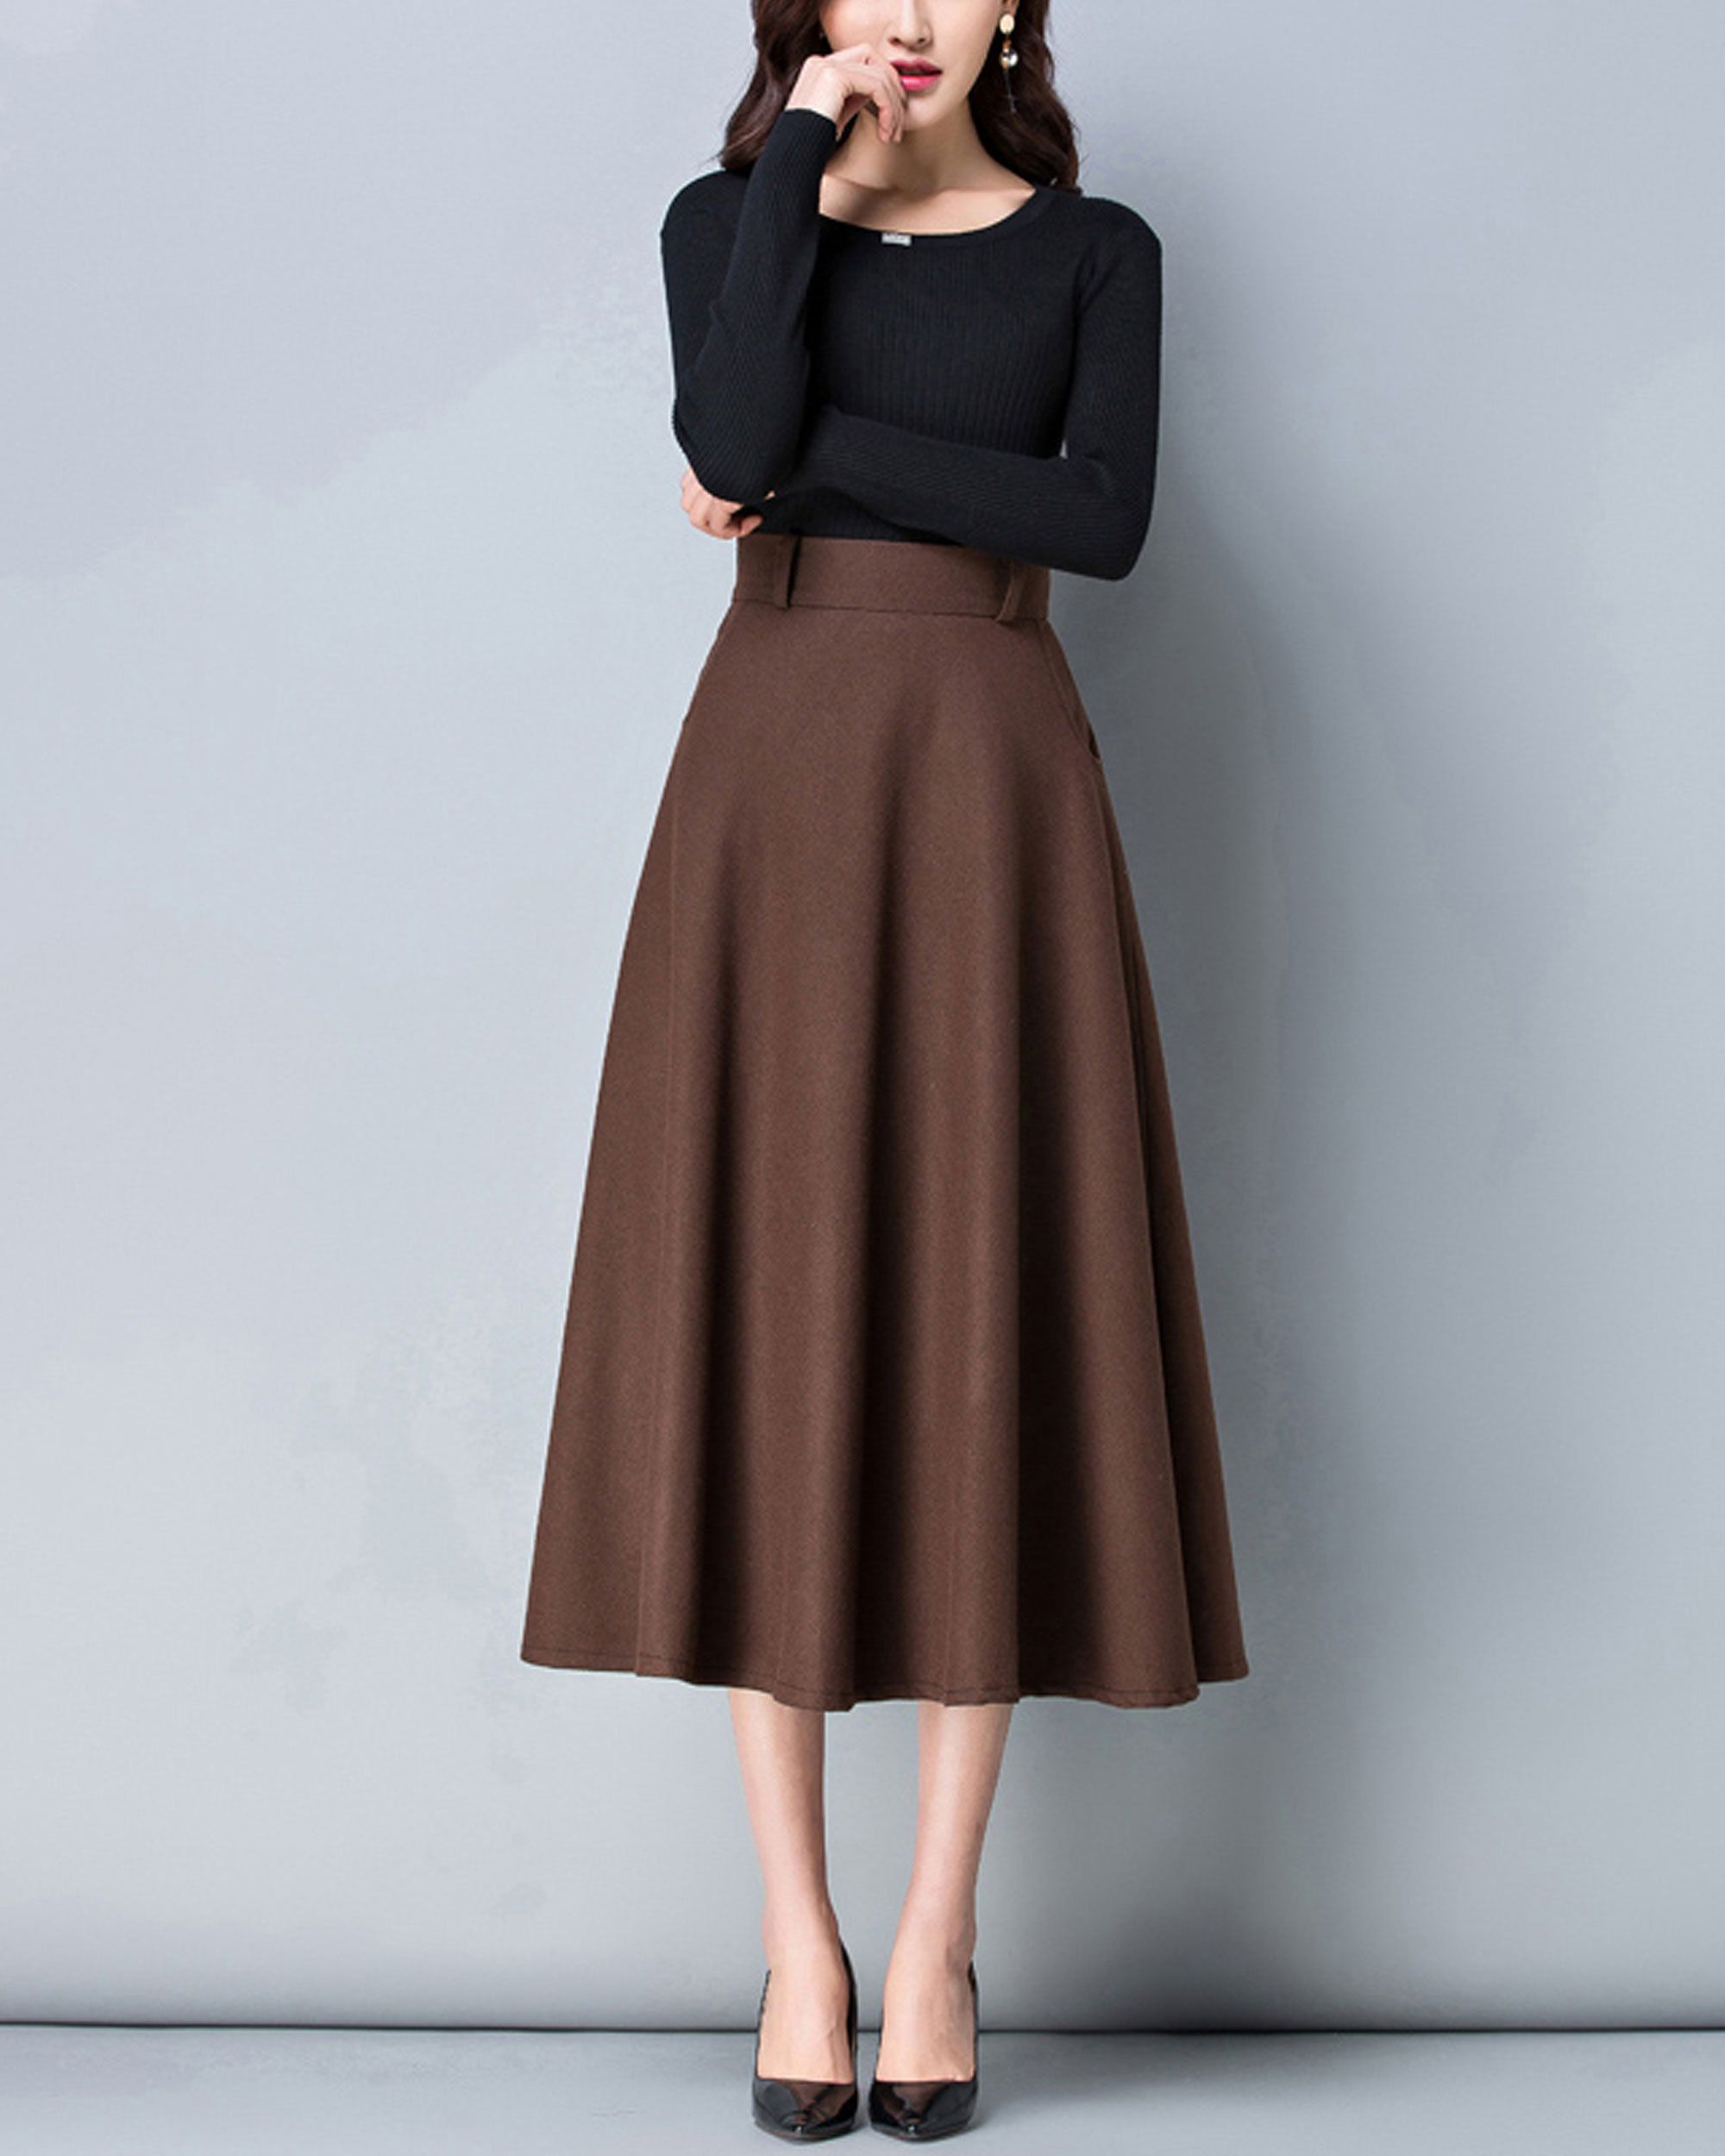 A-Line Allure: Styling Tips for A-Line Skirts